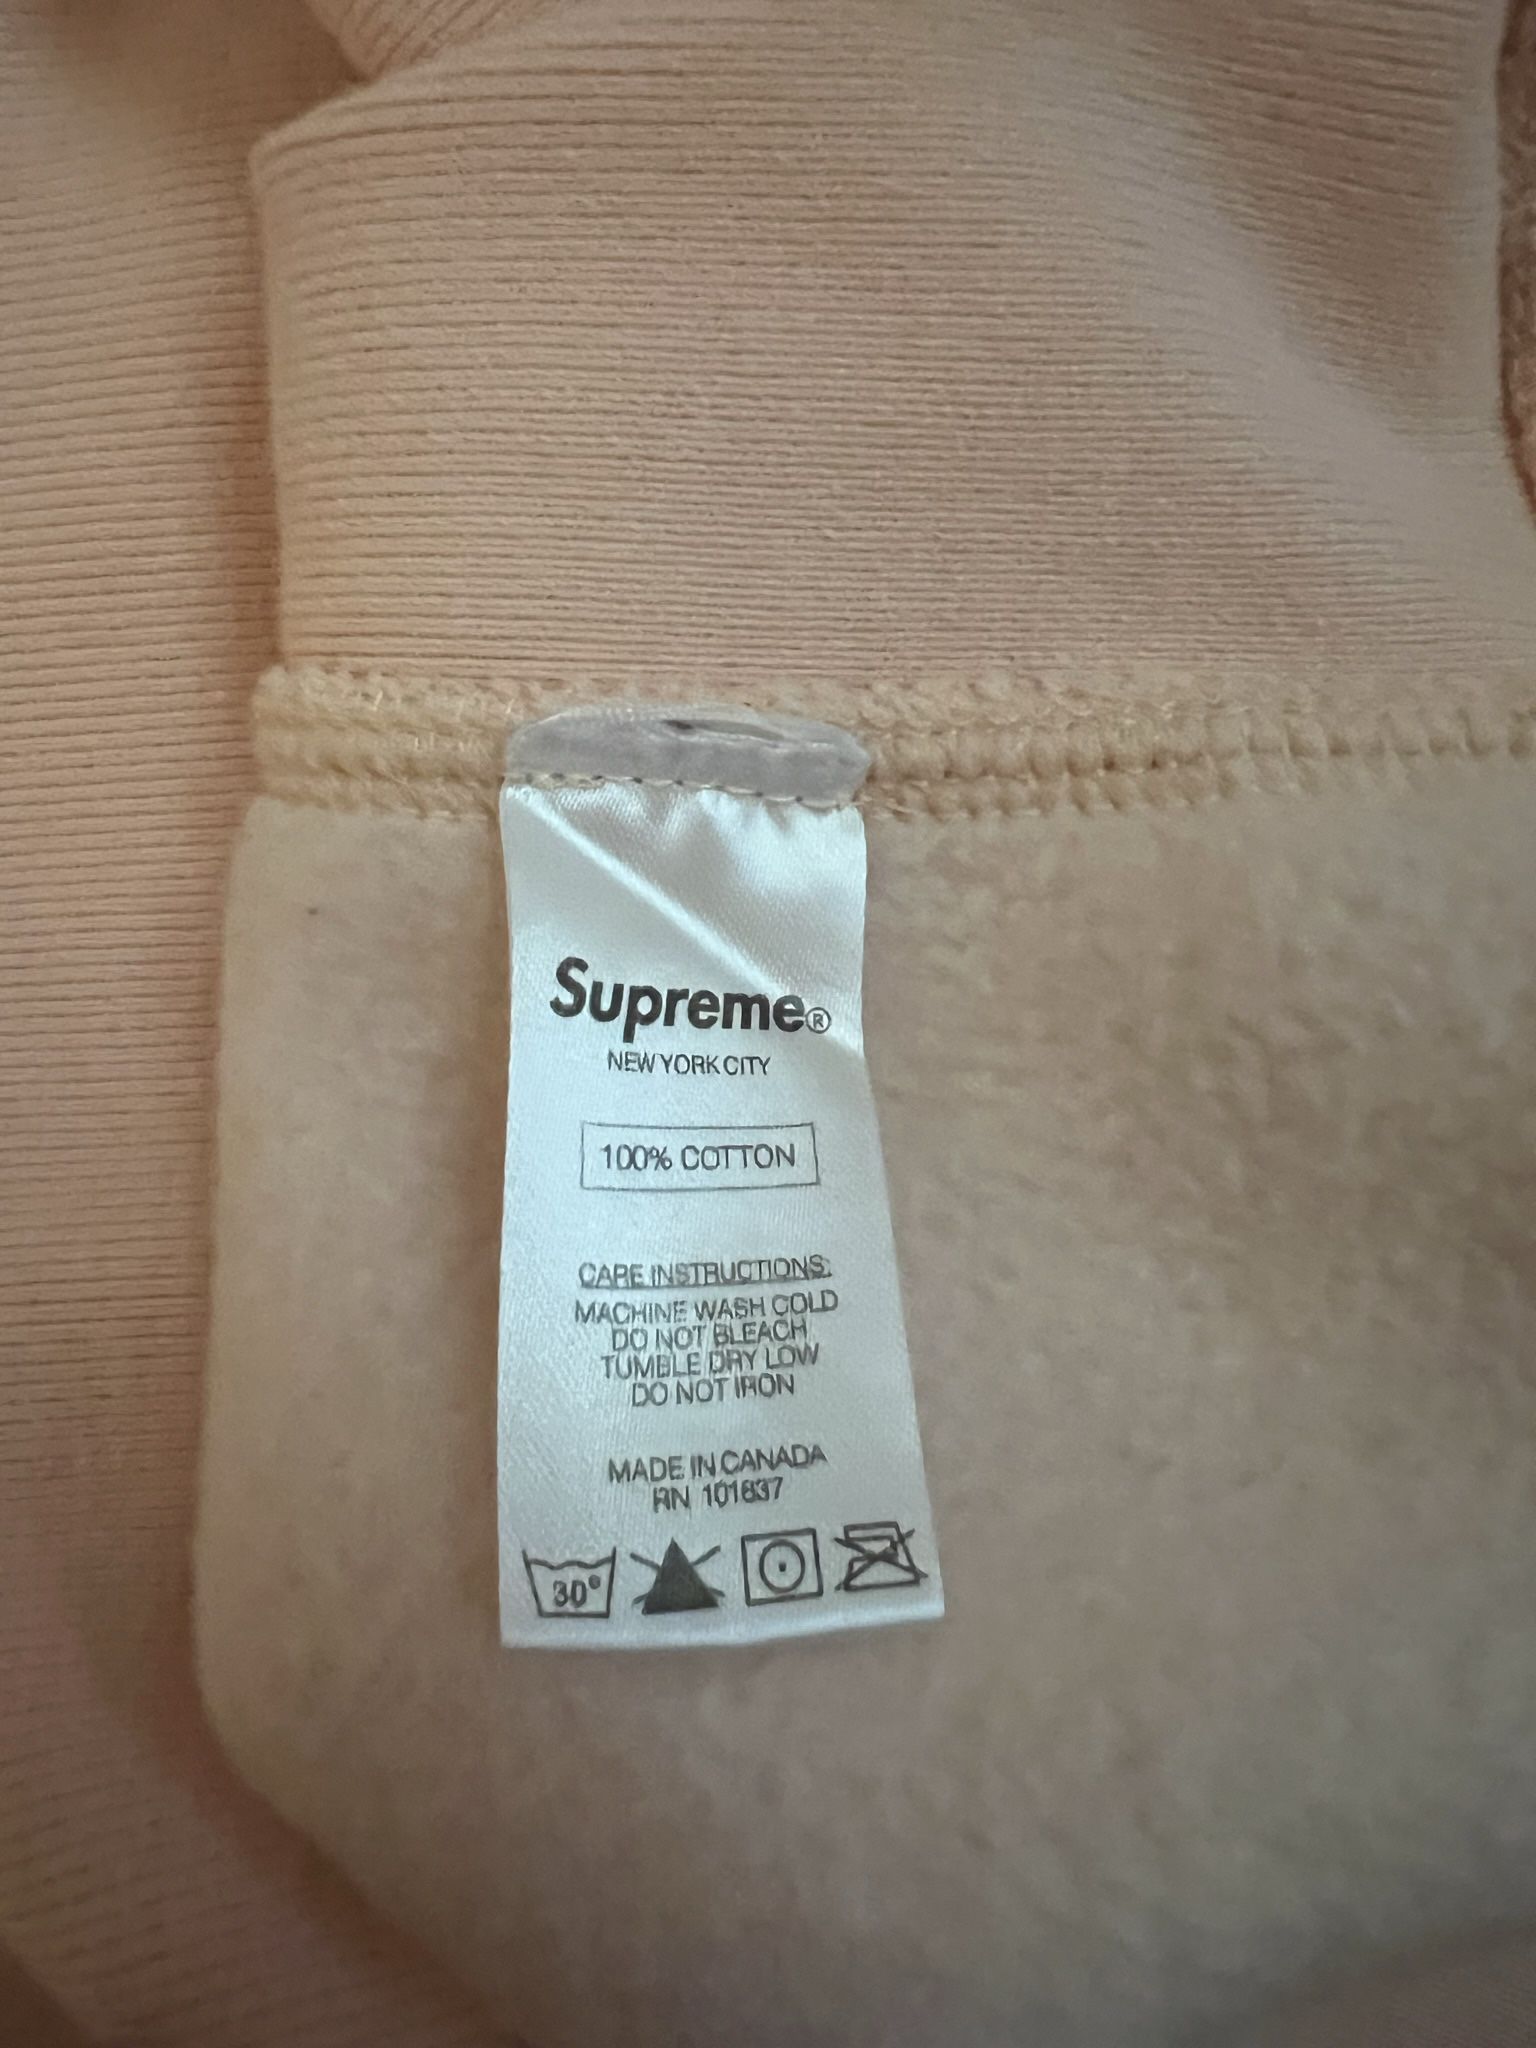 Supreme Box Logo Hoodie Teal FW 12 for Sale in Irvine, CA - OfferUp